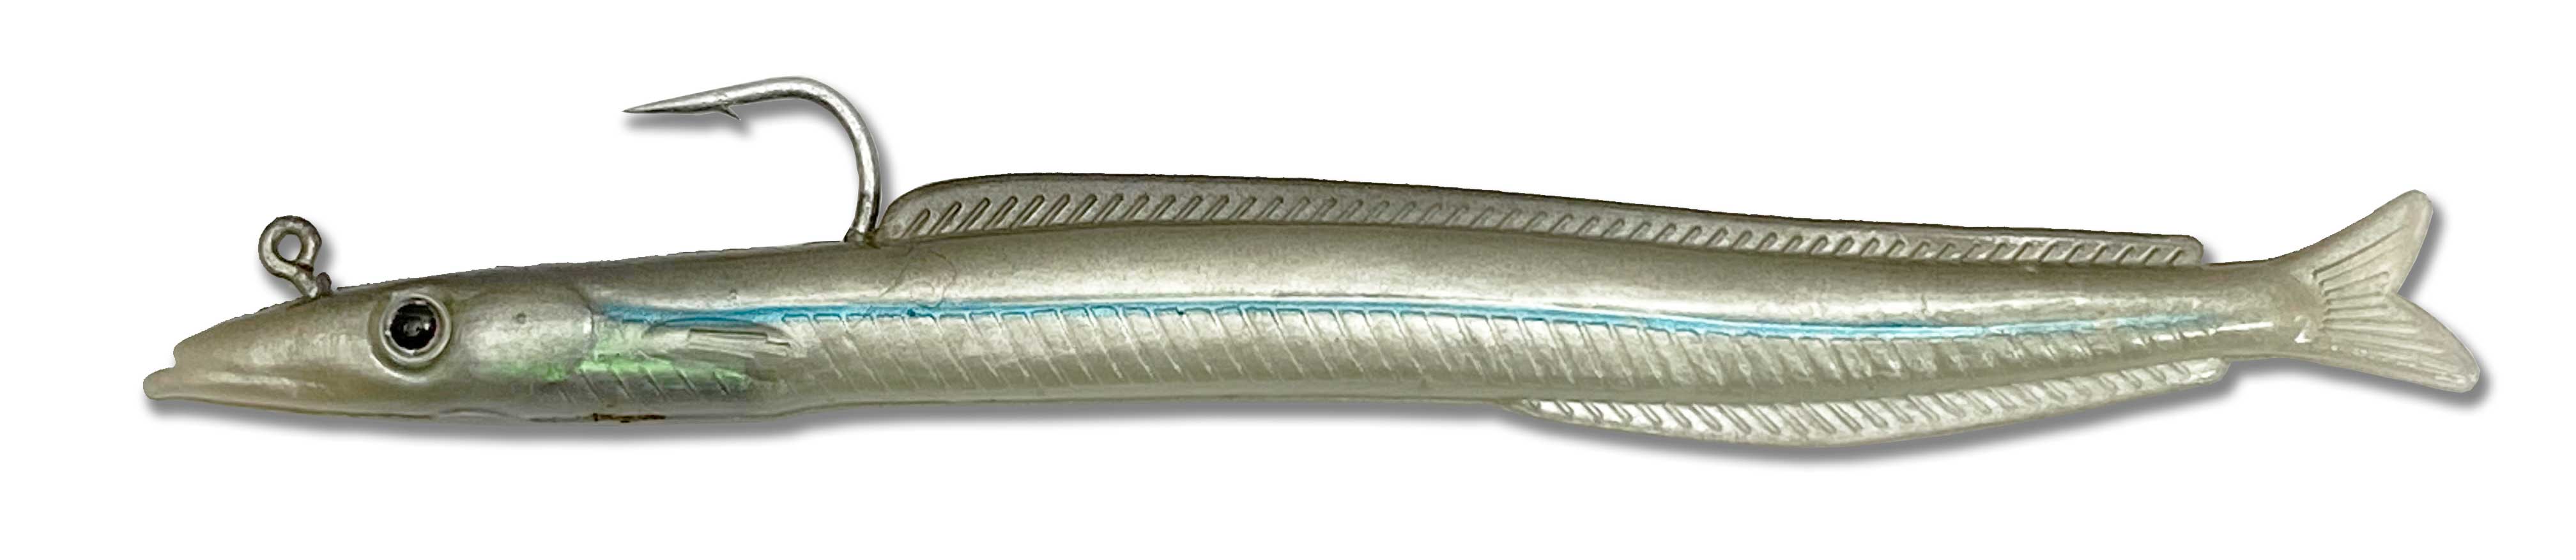 5" 3 Pack Soft Sand Eel Lure Natural Stripe Rigged